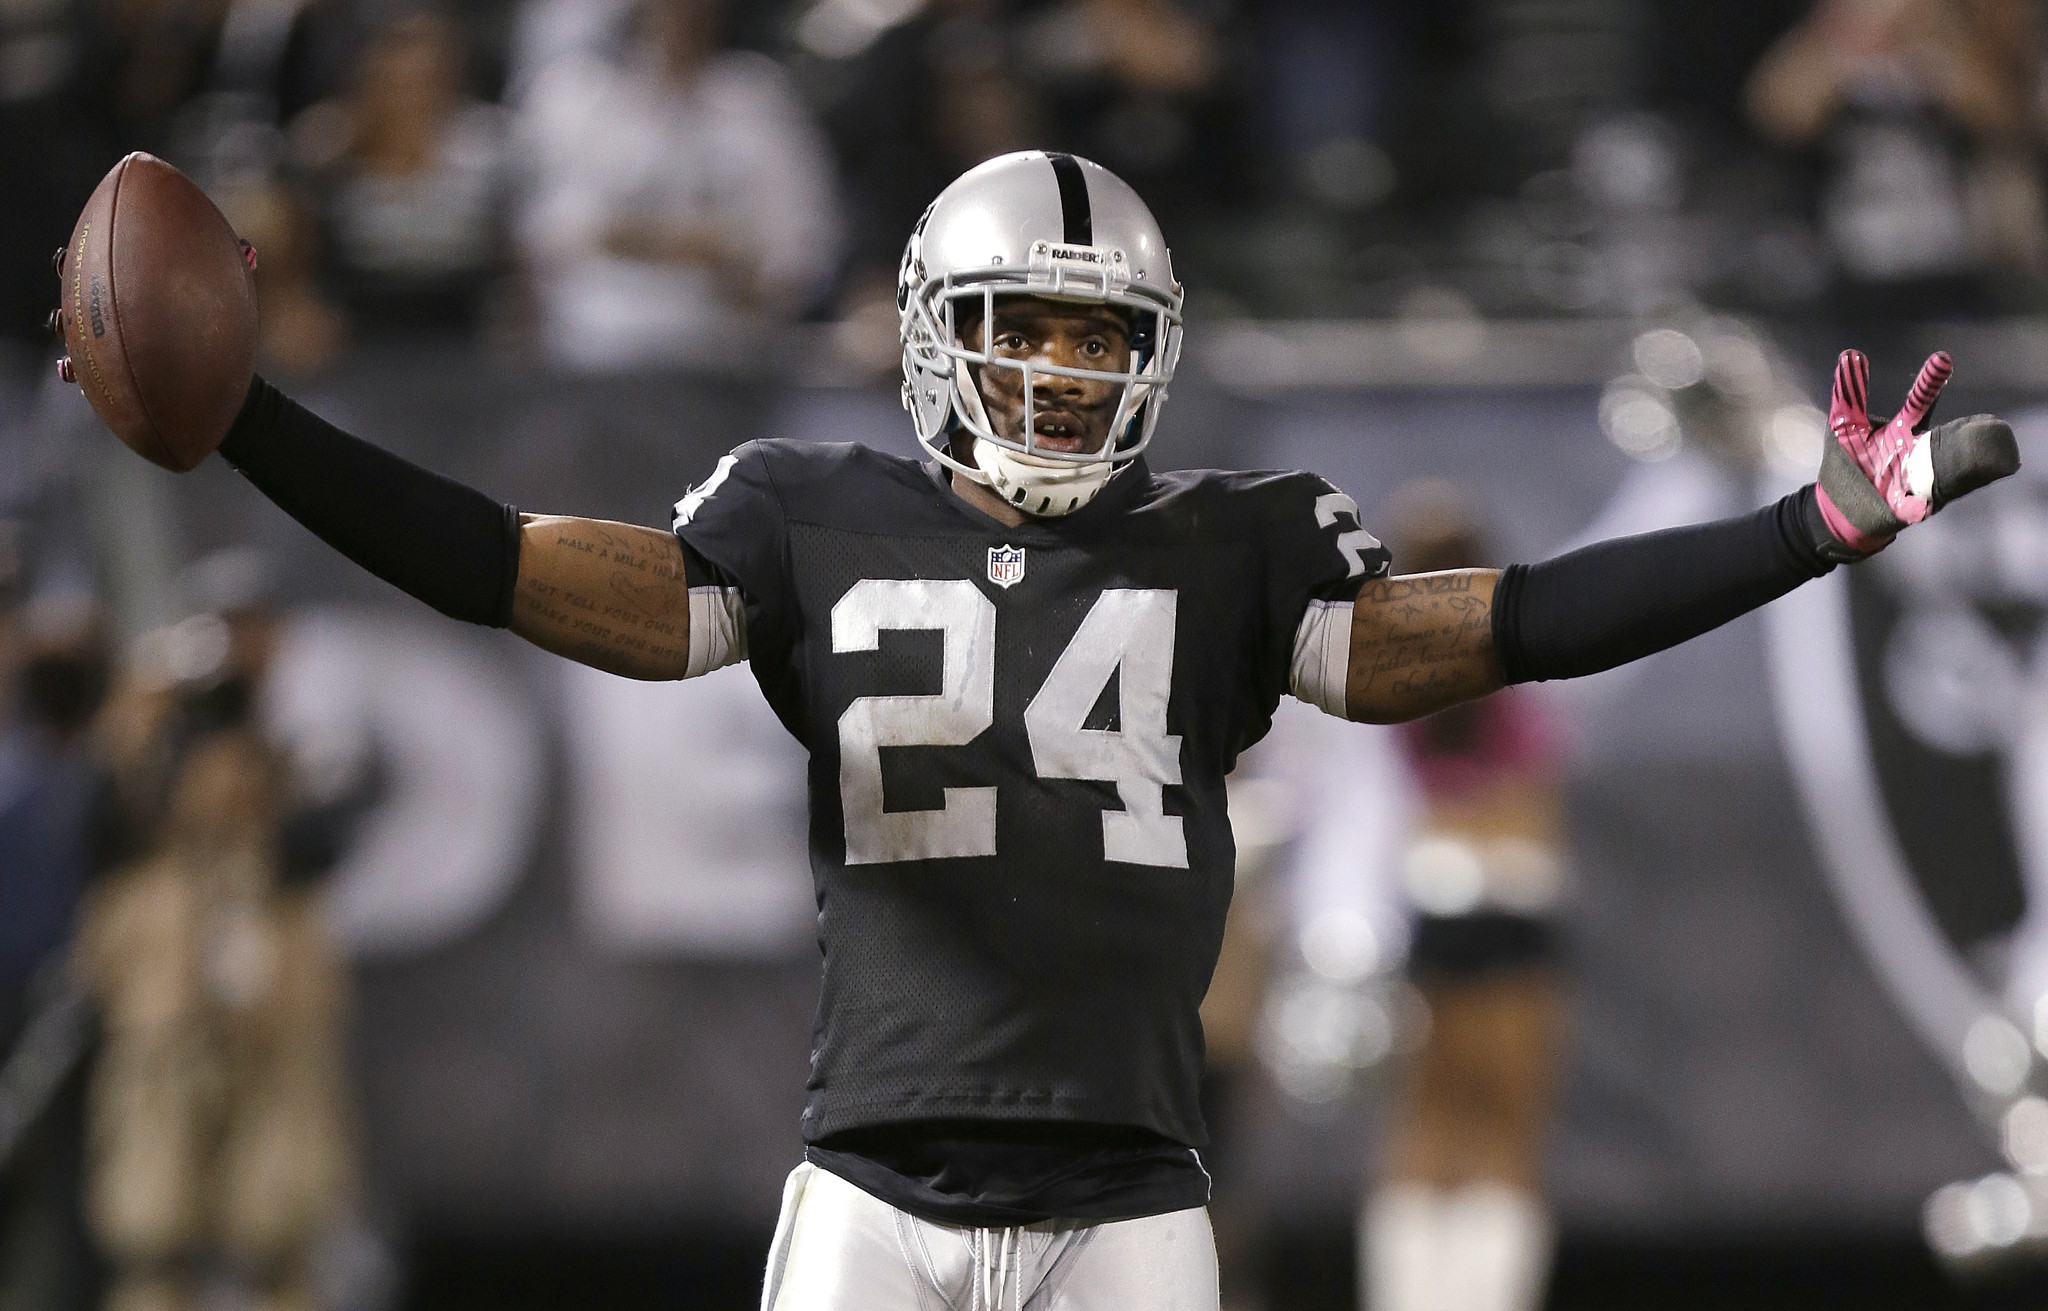 Charles Woodson to retire after 18 seasons - Chicago Tribune